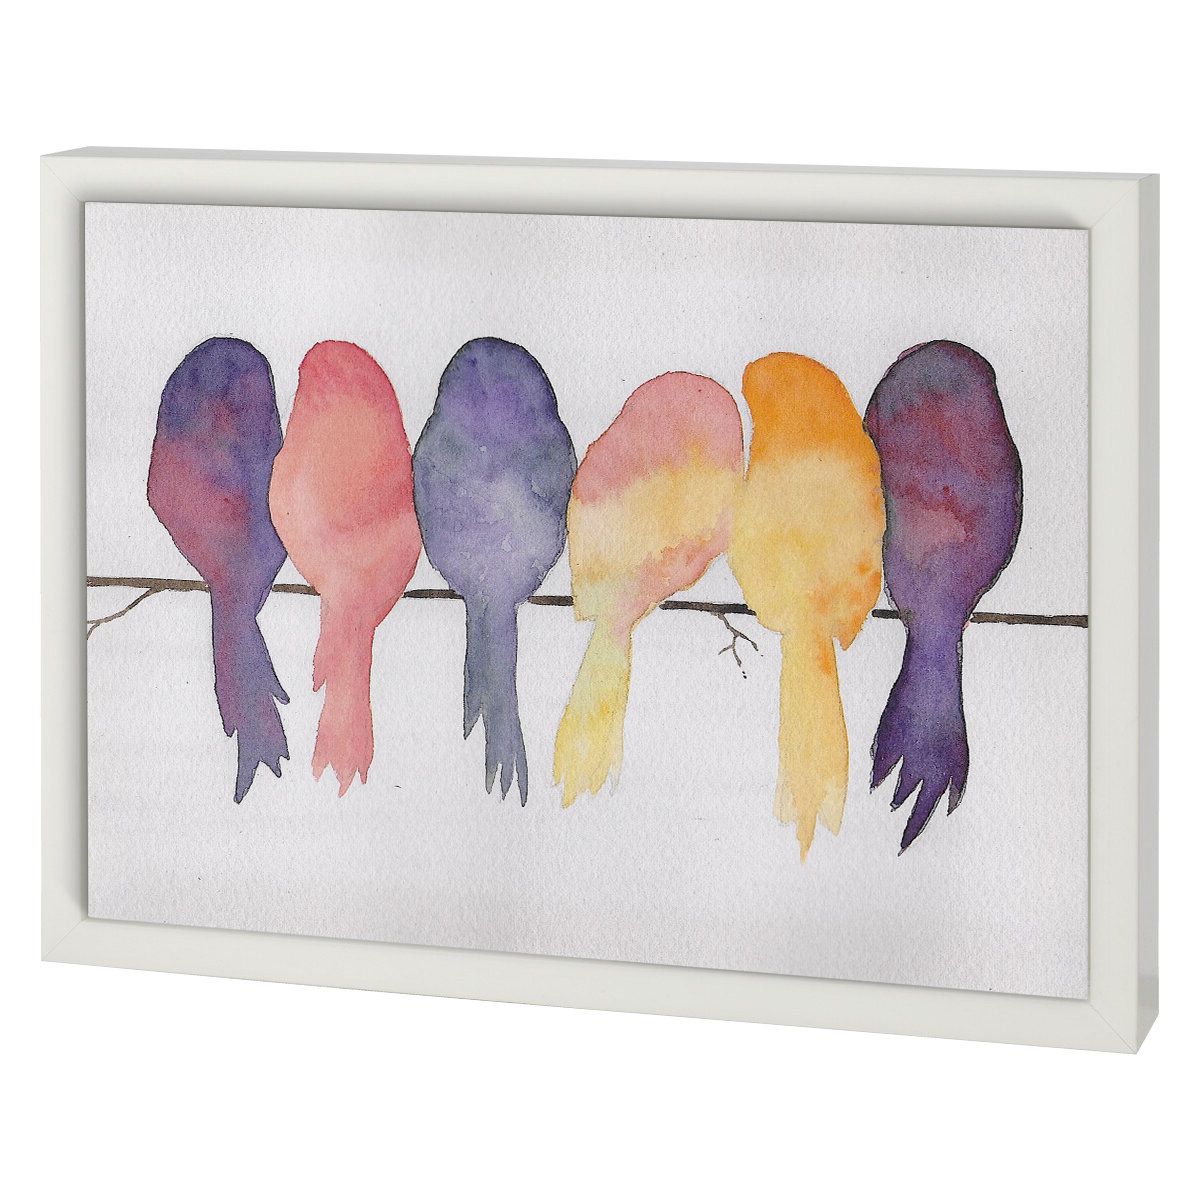 2020 Birds On A Wire Wall Décor By Winston Porter For Birds On A Wire – Picture Frame Graphic Art Print On Canvas (View 6 of 20)